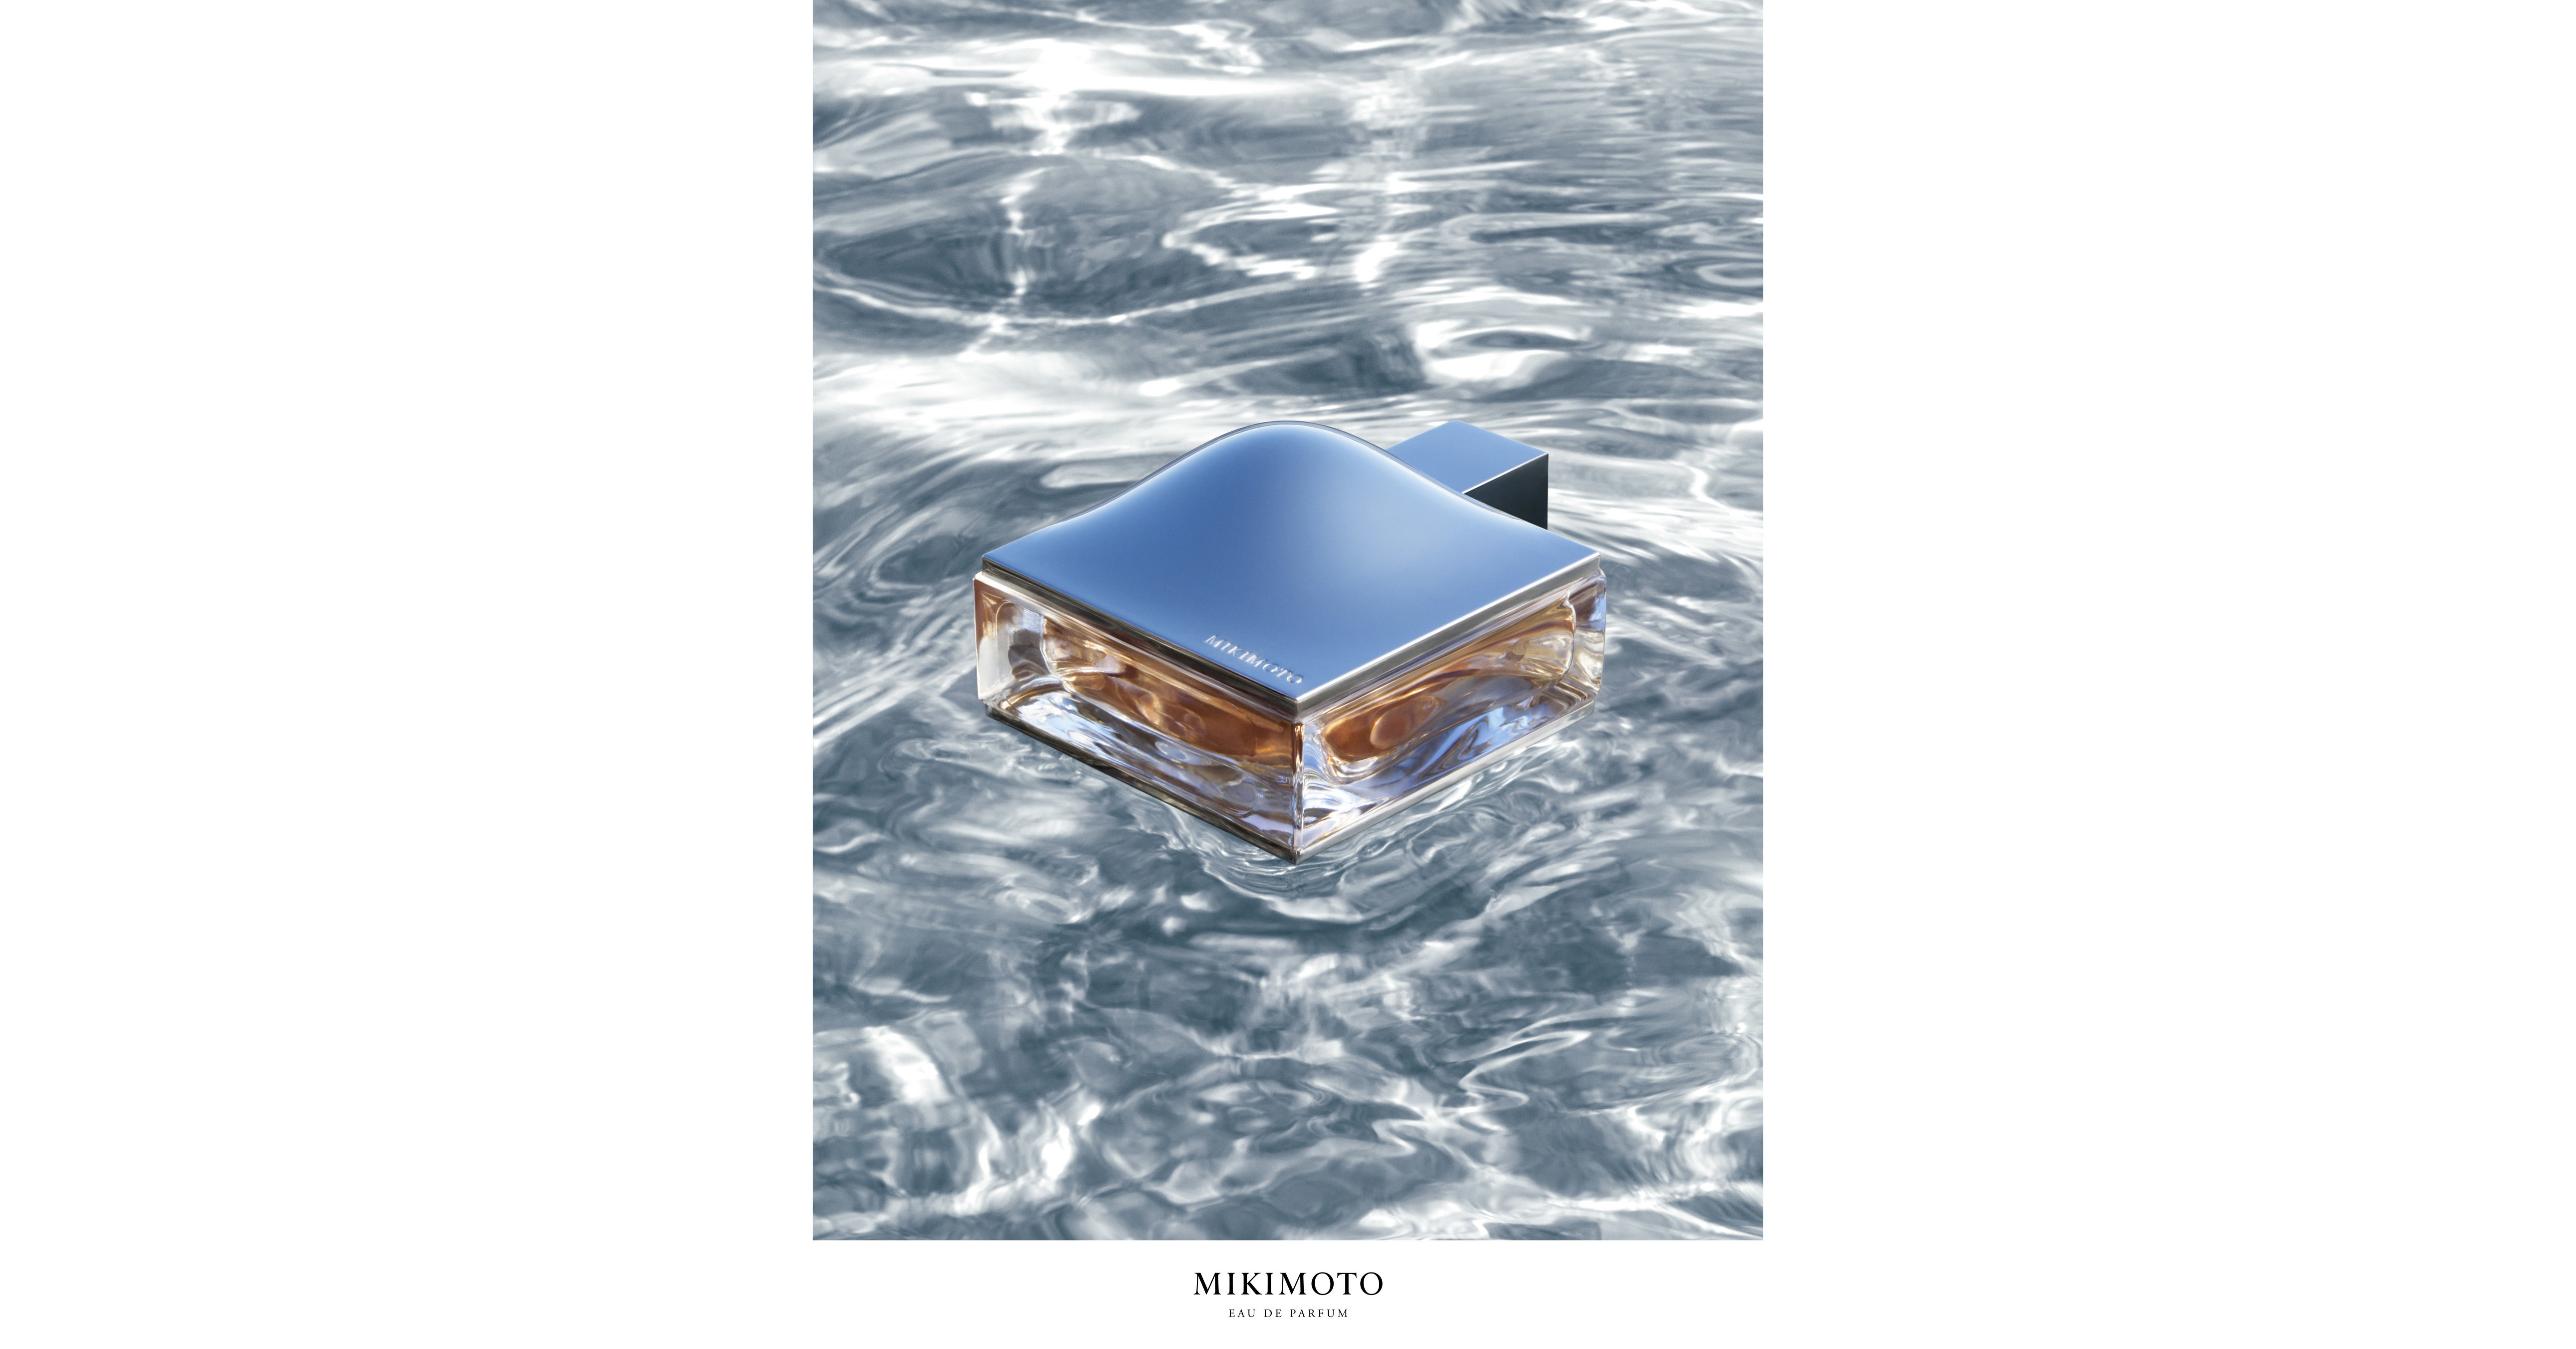 Mikimoto Launches First Fragrance In Partnership With Scent Beauty